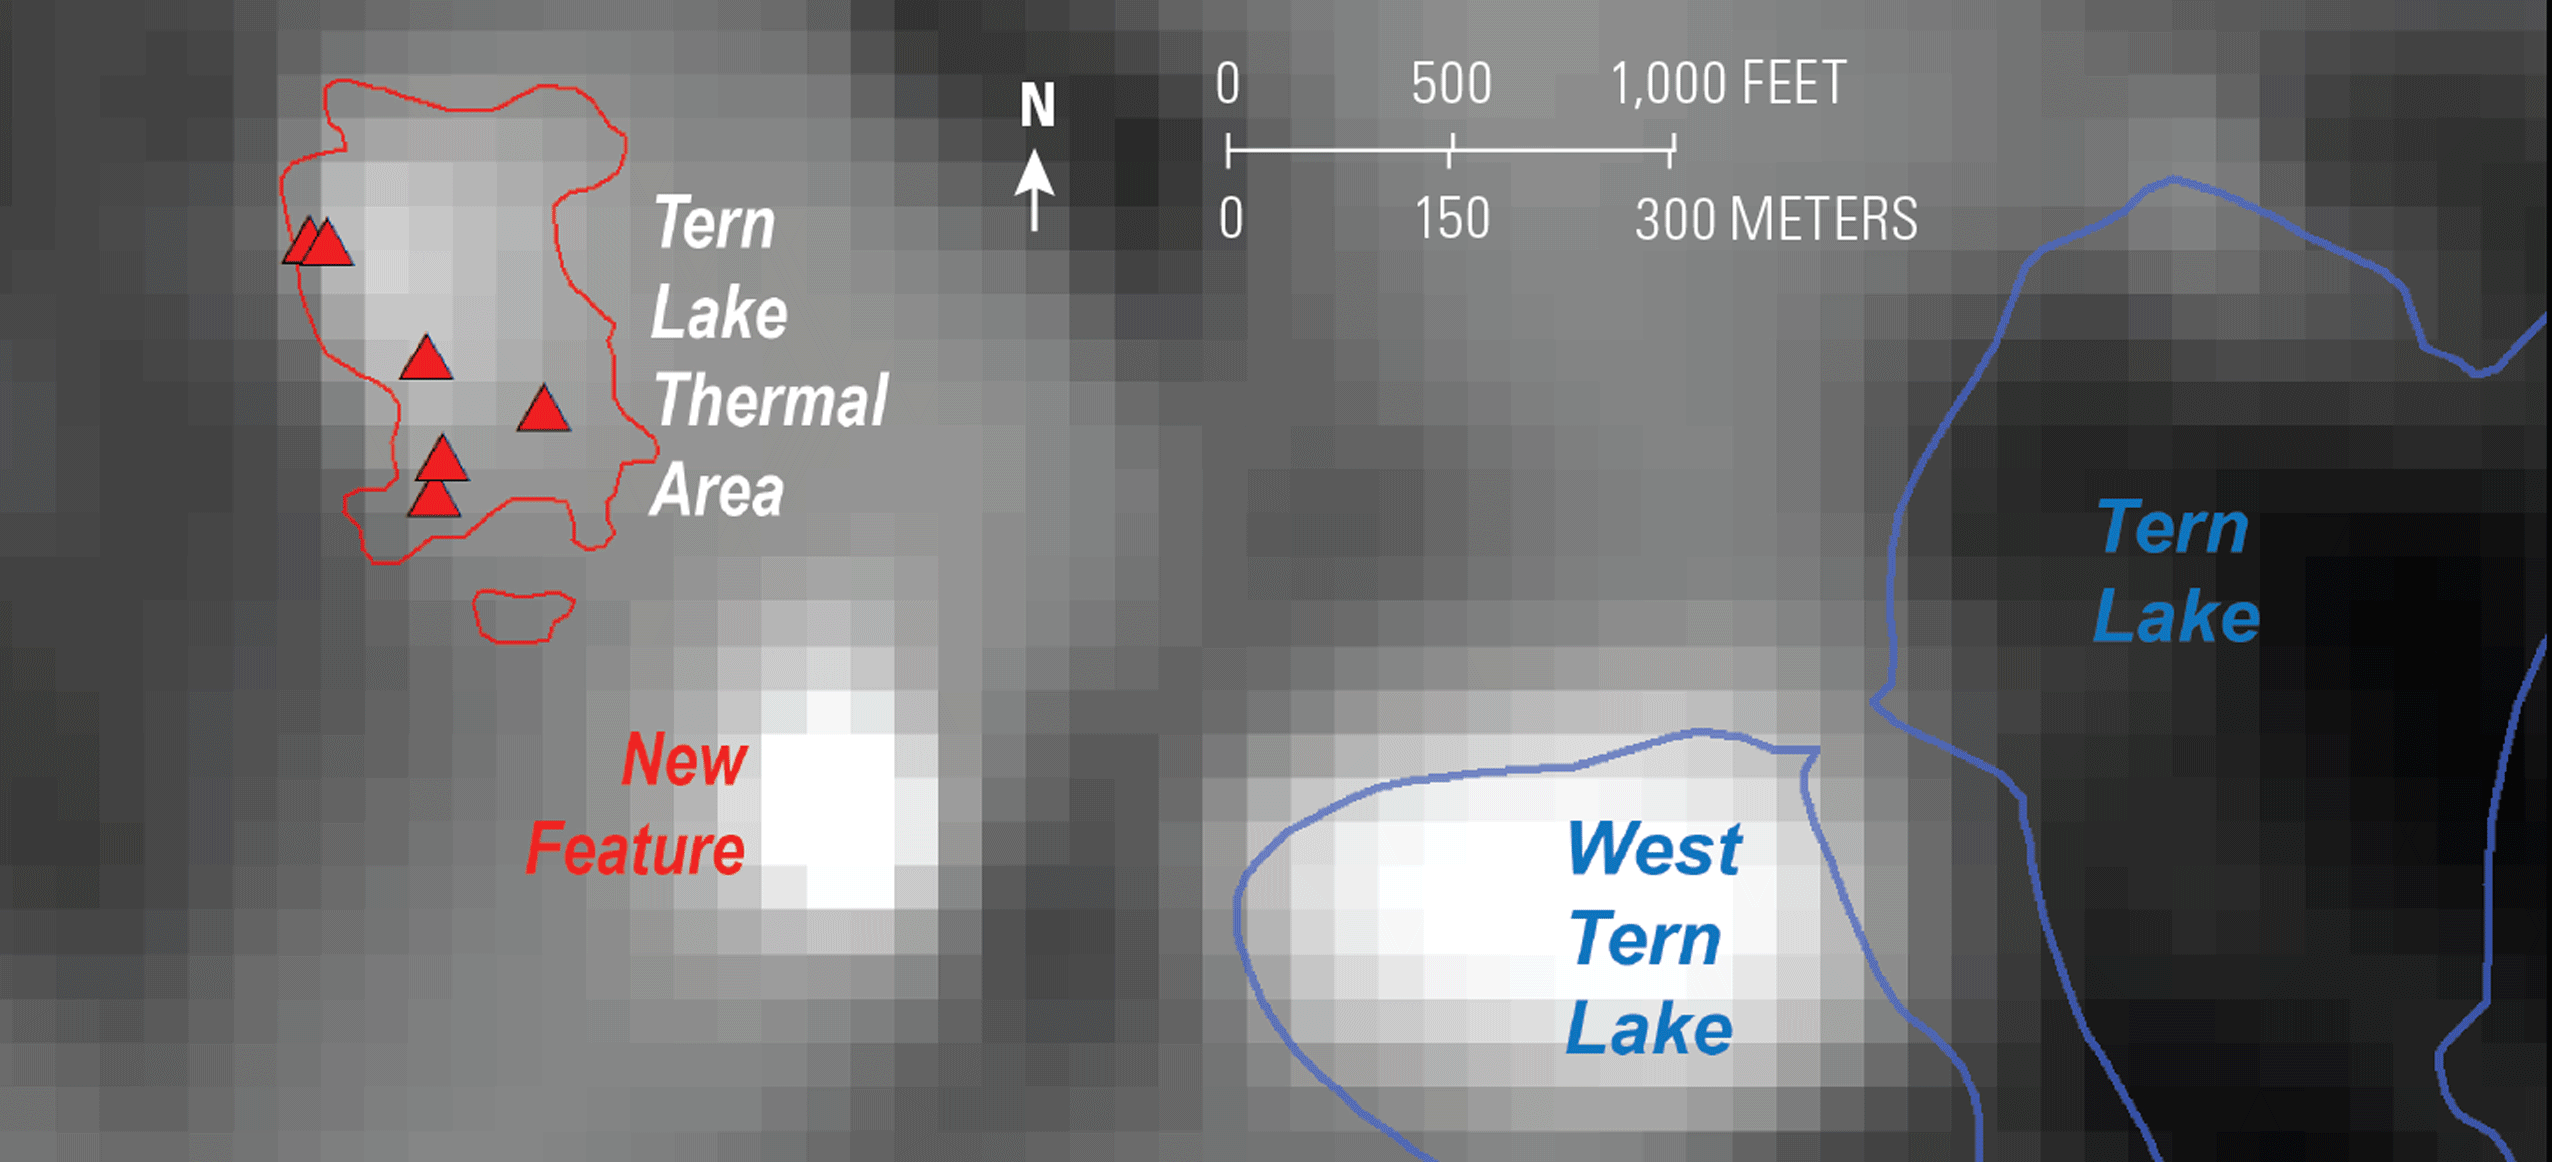 Thermal image of a new feature in Yellowstone National Park.